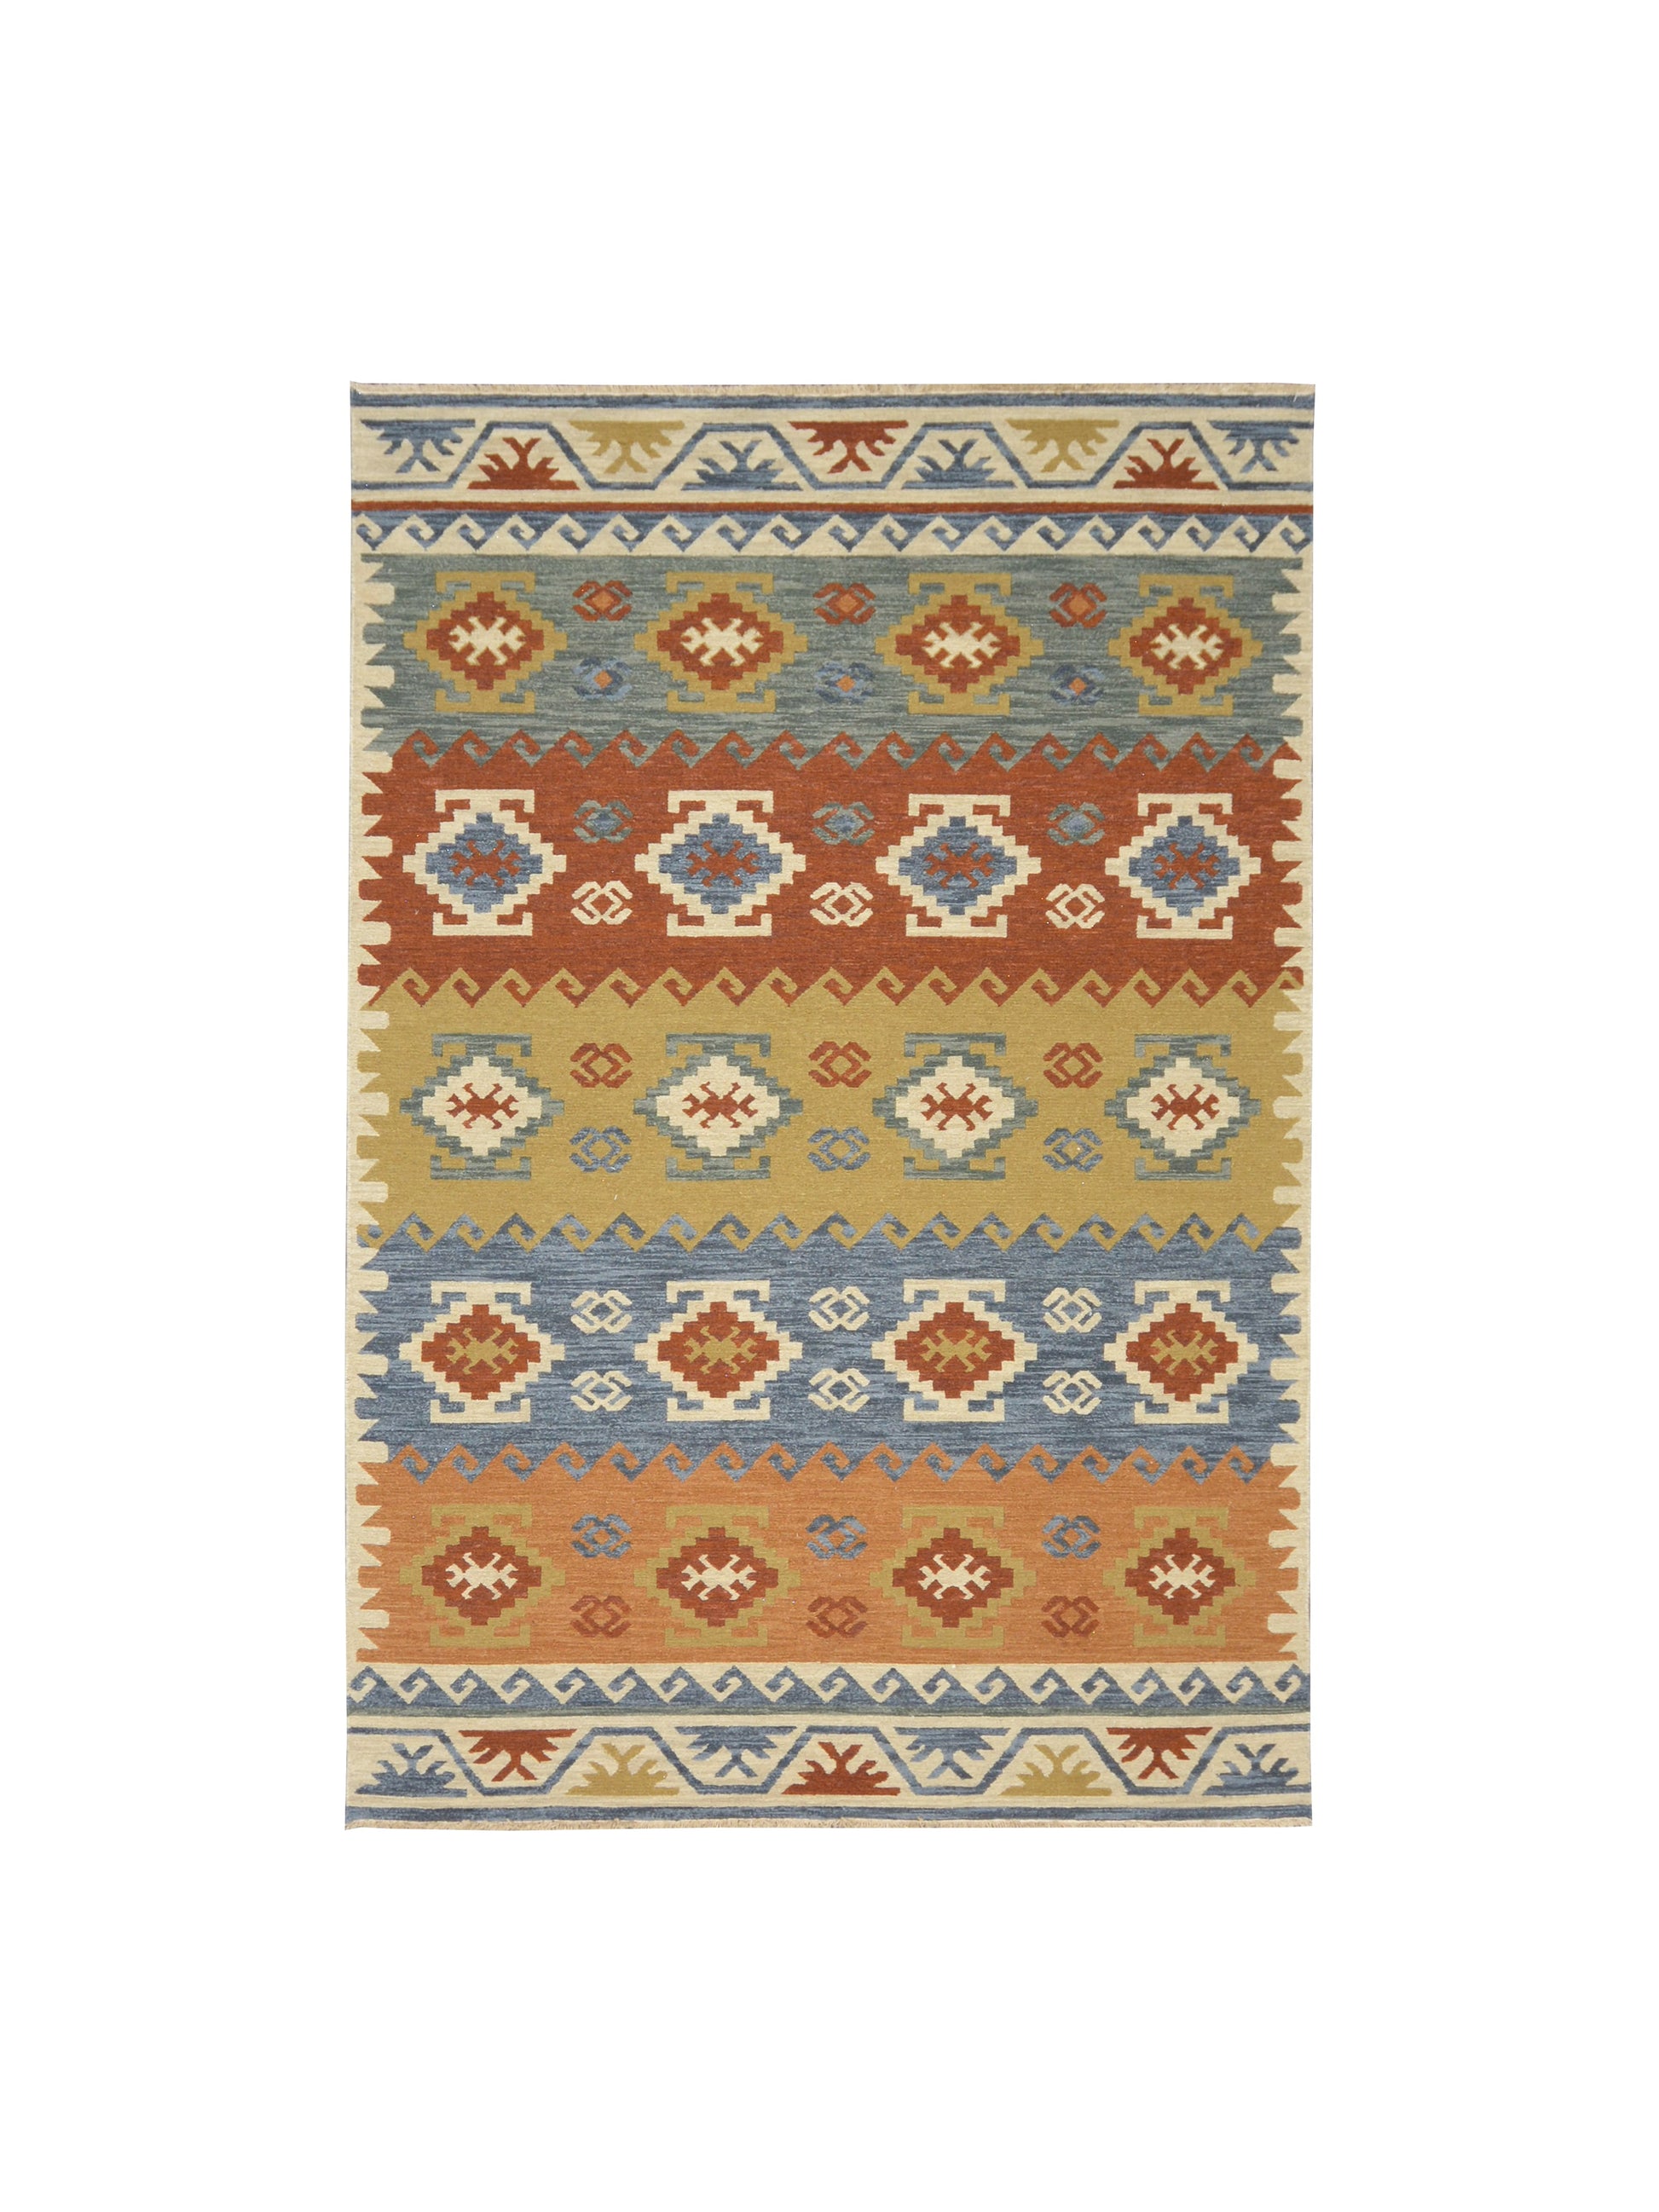 Get trendy with Ivory Pure Wool Traditional Soumak Area Rug 6.0x8.11ft 184x270Cms - Traditional Rugs available at Jaipur Oriental Rugs. Grab yours for $545.00 today!